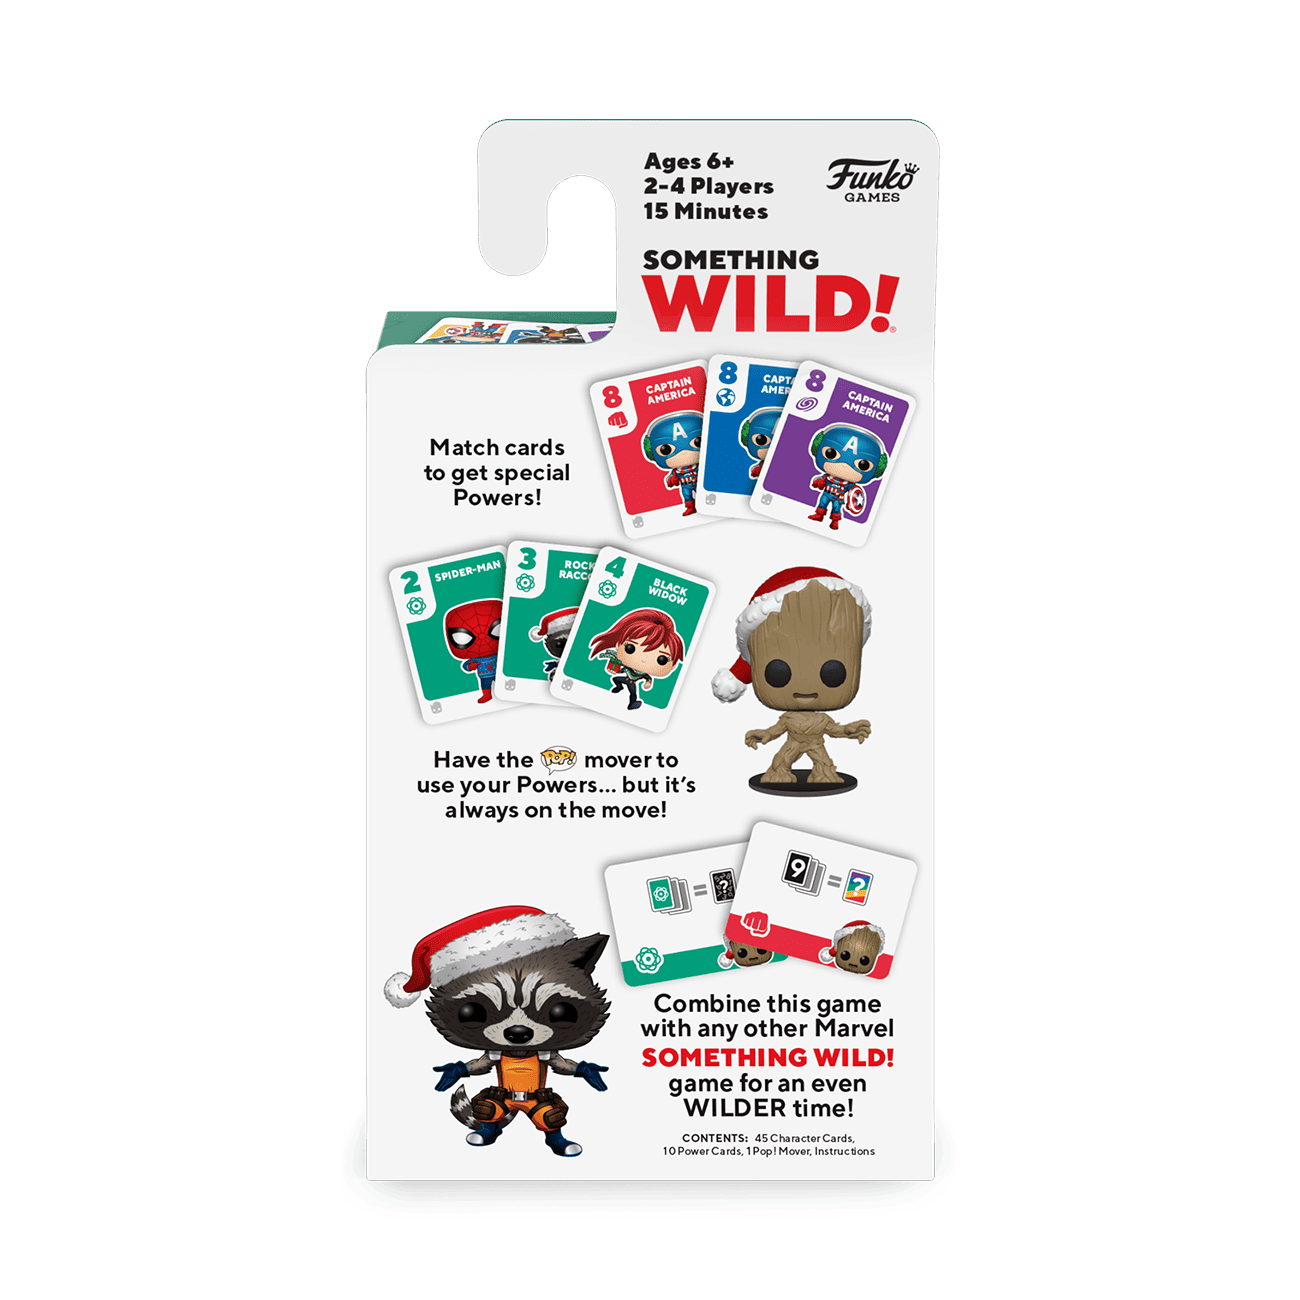 Buy Something Wild! Marvel Holiday Baby Groot Card Game at Funko.